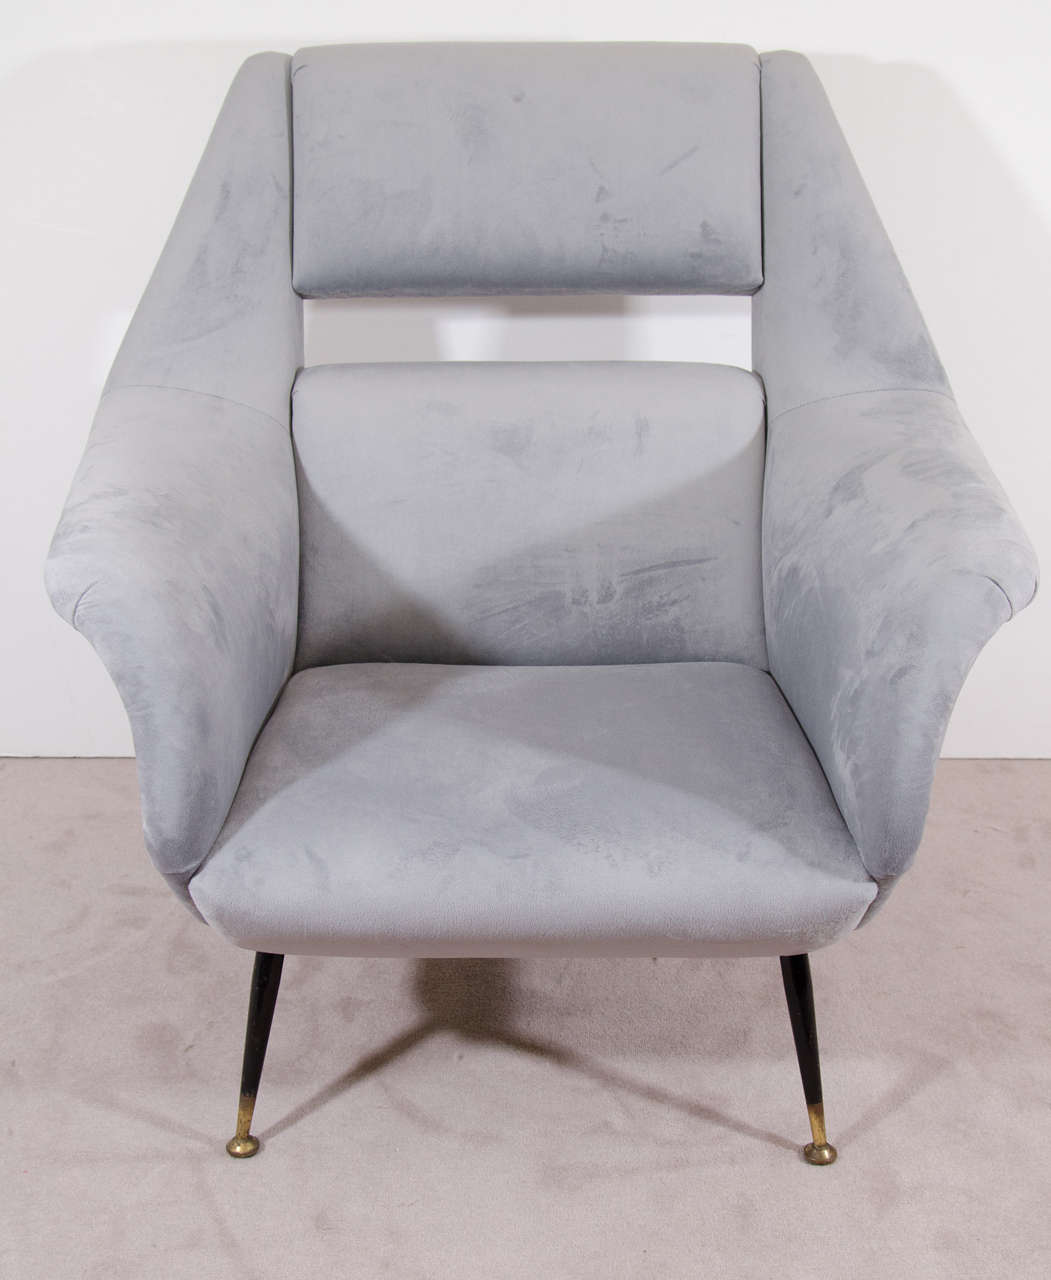 A vintage pair of Italian club chairs with metal legs in the manner of Carlo di Carli. Newly reupholstered in bluish-gray velvet. Good vintage condition with age appropriate wear. Some loss of paint on legs.